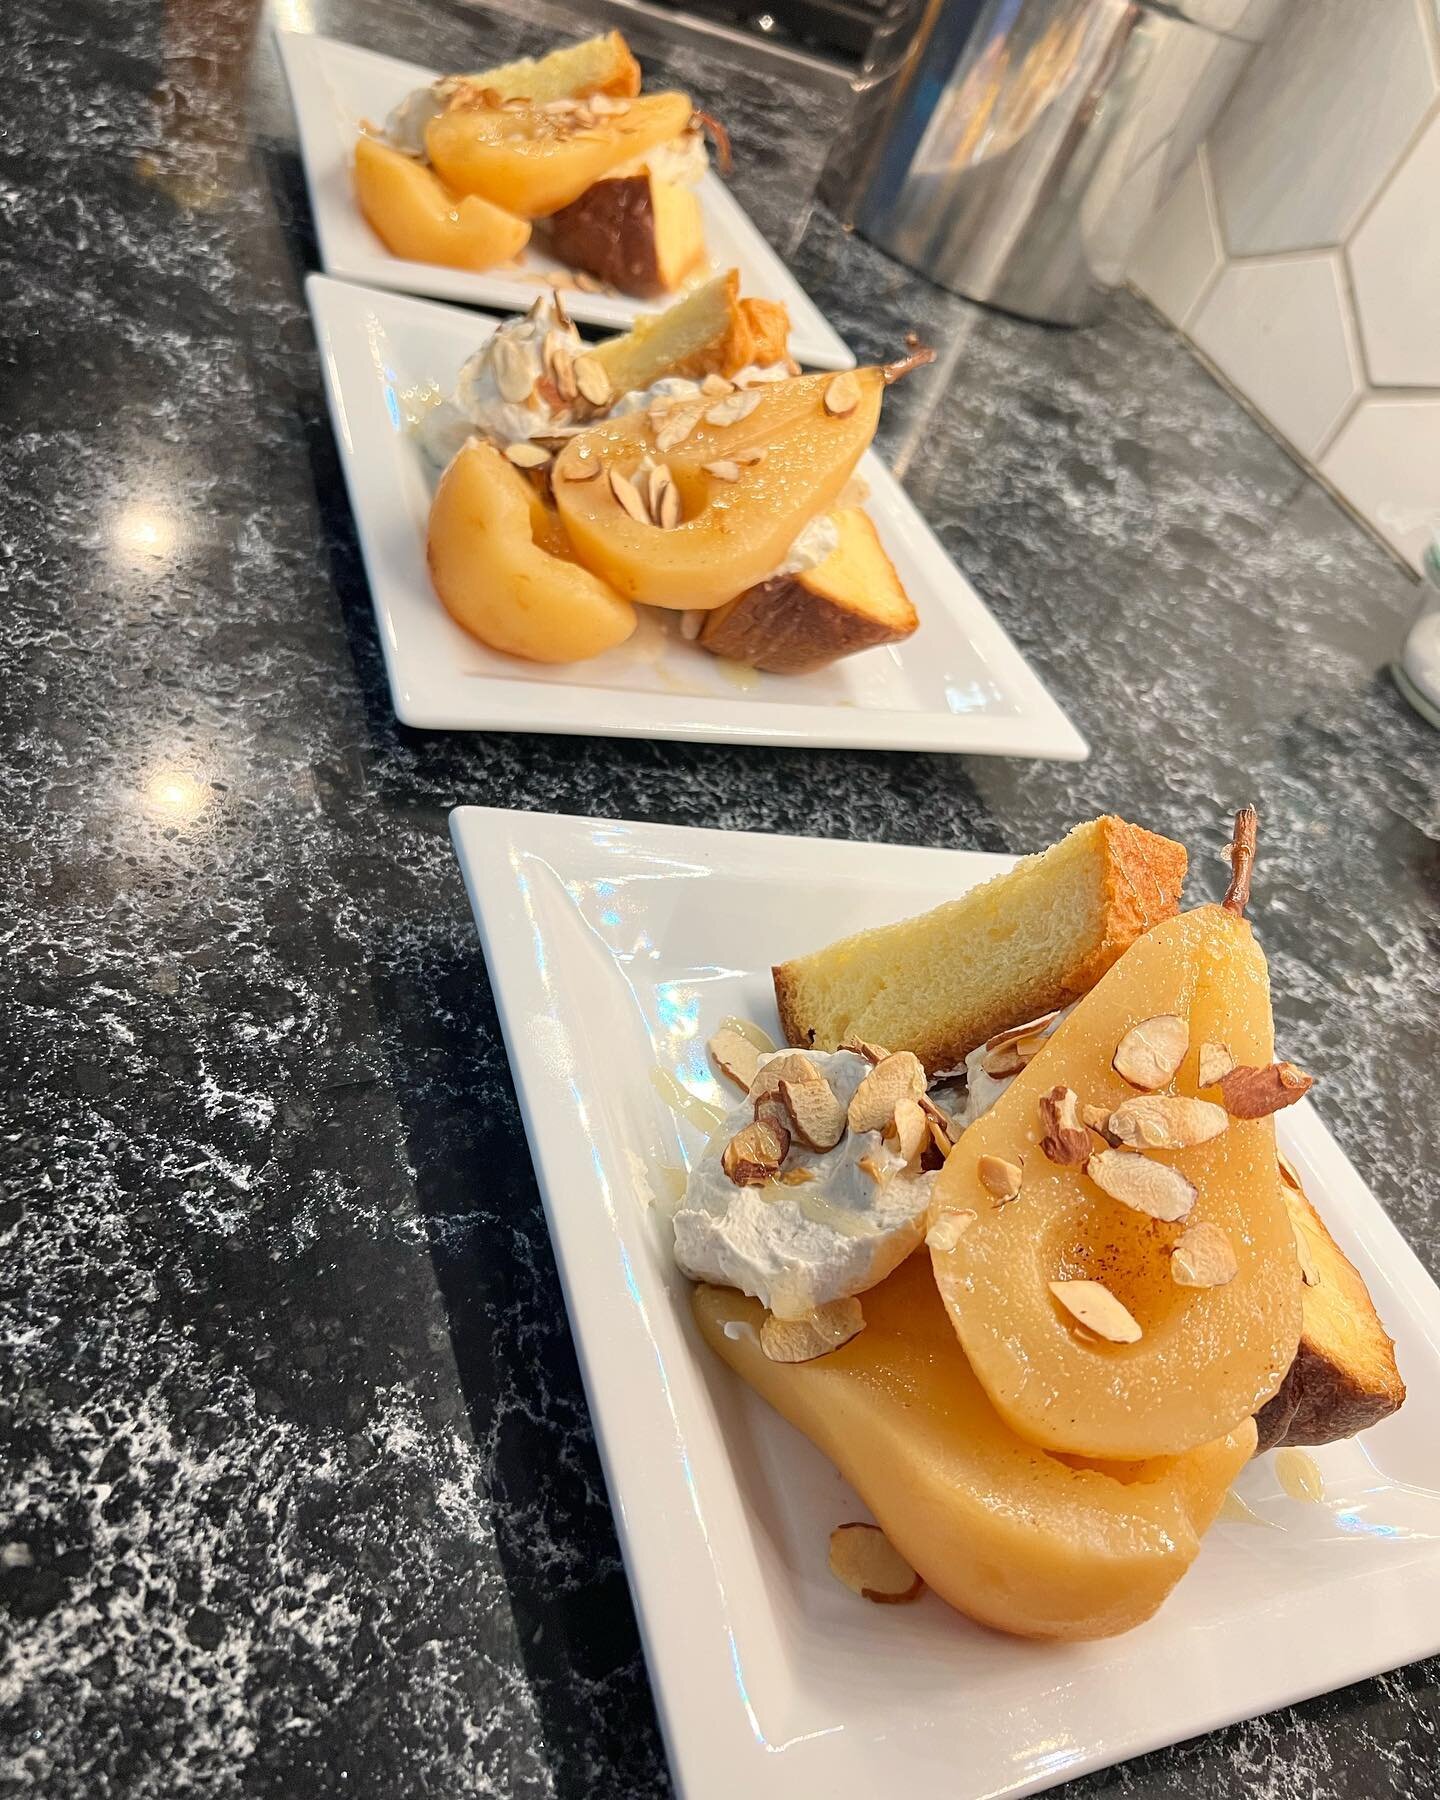 Dessert with friends, inspired by some things I&rsquo;ve been cooking at @thelynhall 
.
Poached pears, cardamom &amp; mascarpone whipped cream, honey, almonds and store-bought pandoro cake because I was short on time and this was a spur of the moment